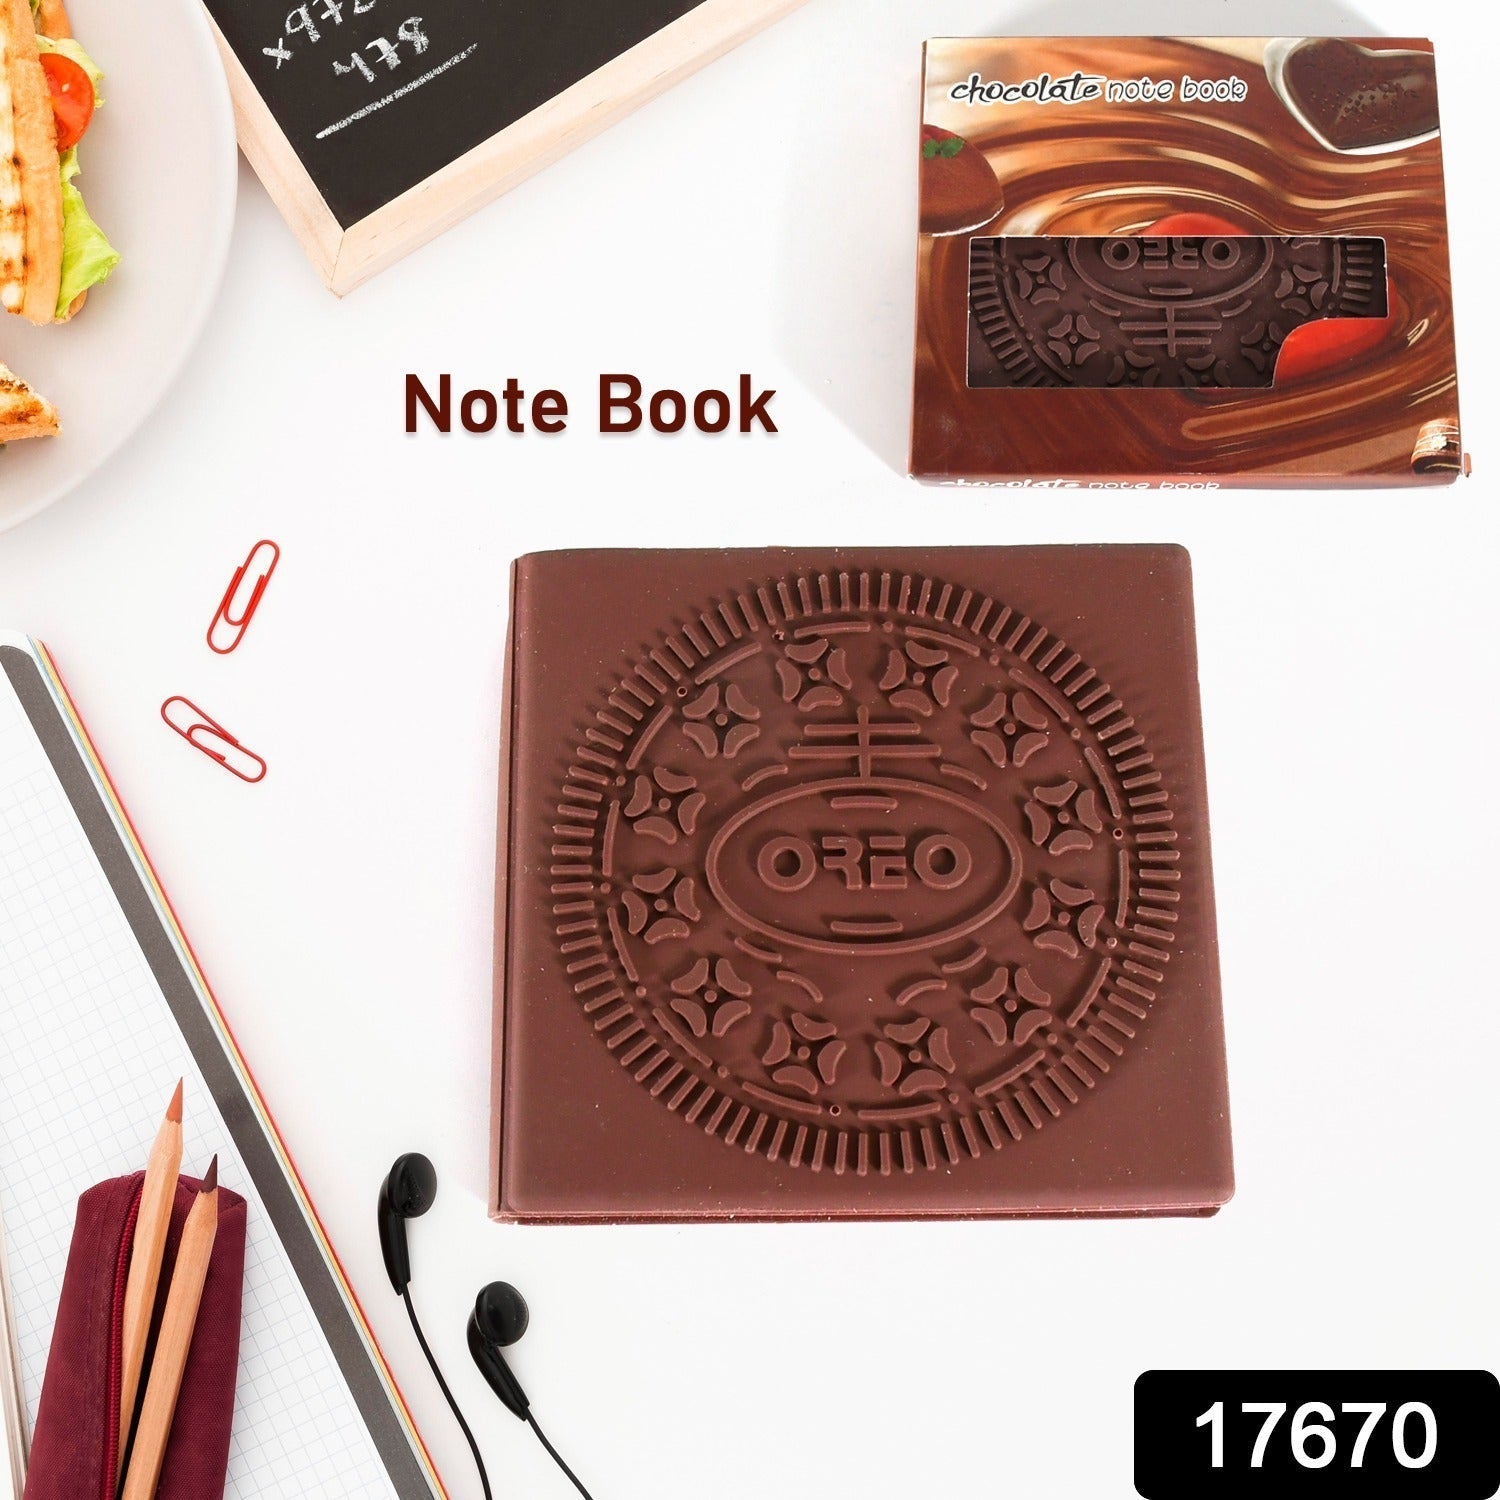 17670 Chocolate Diary Notebooks Original Chocolate Smell Writing Practice Book Early Learning Copybook Premium Chocolate Book (1Pc / Book / 80 Pages) 